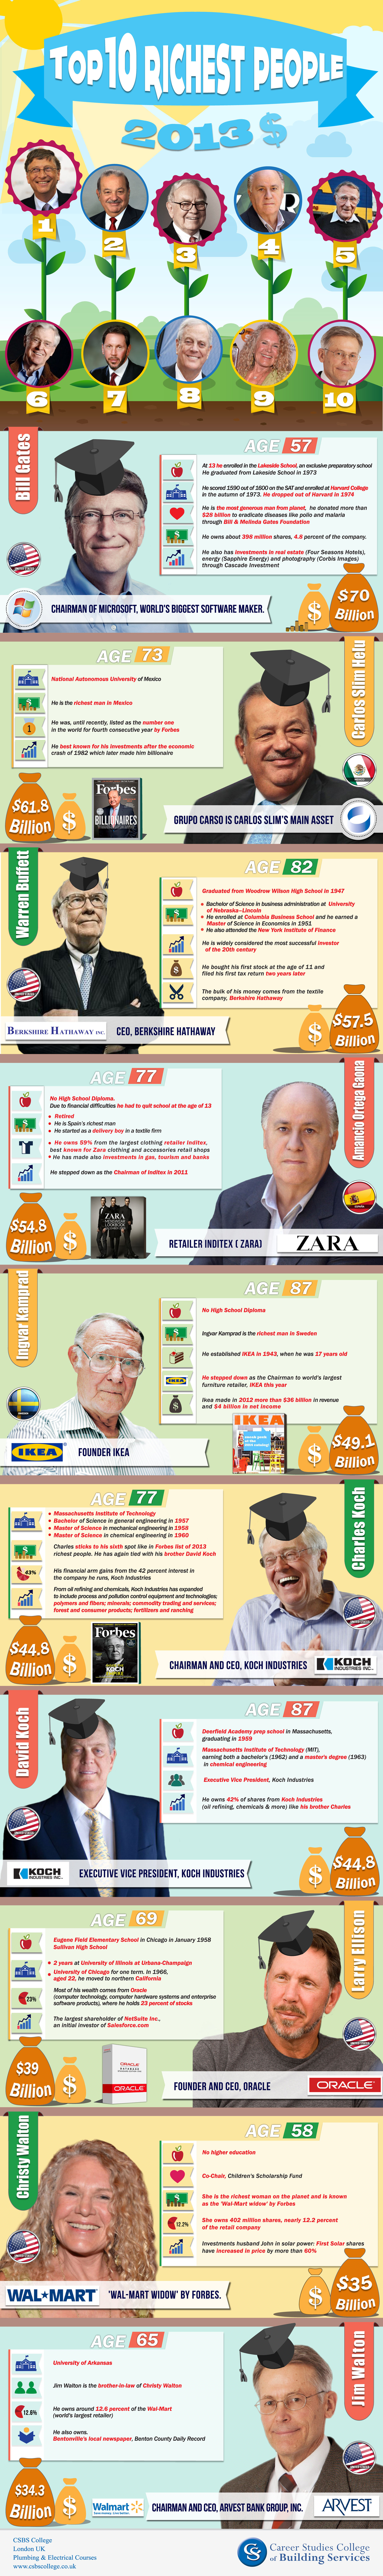 Top 10 Richest People In the World in 2013